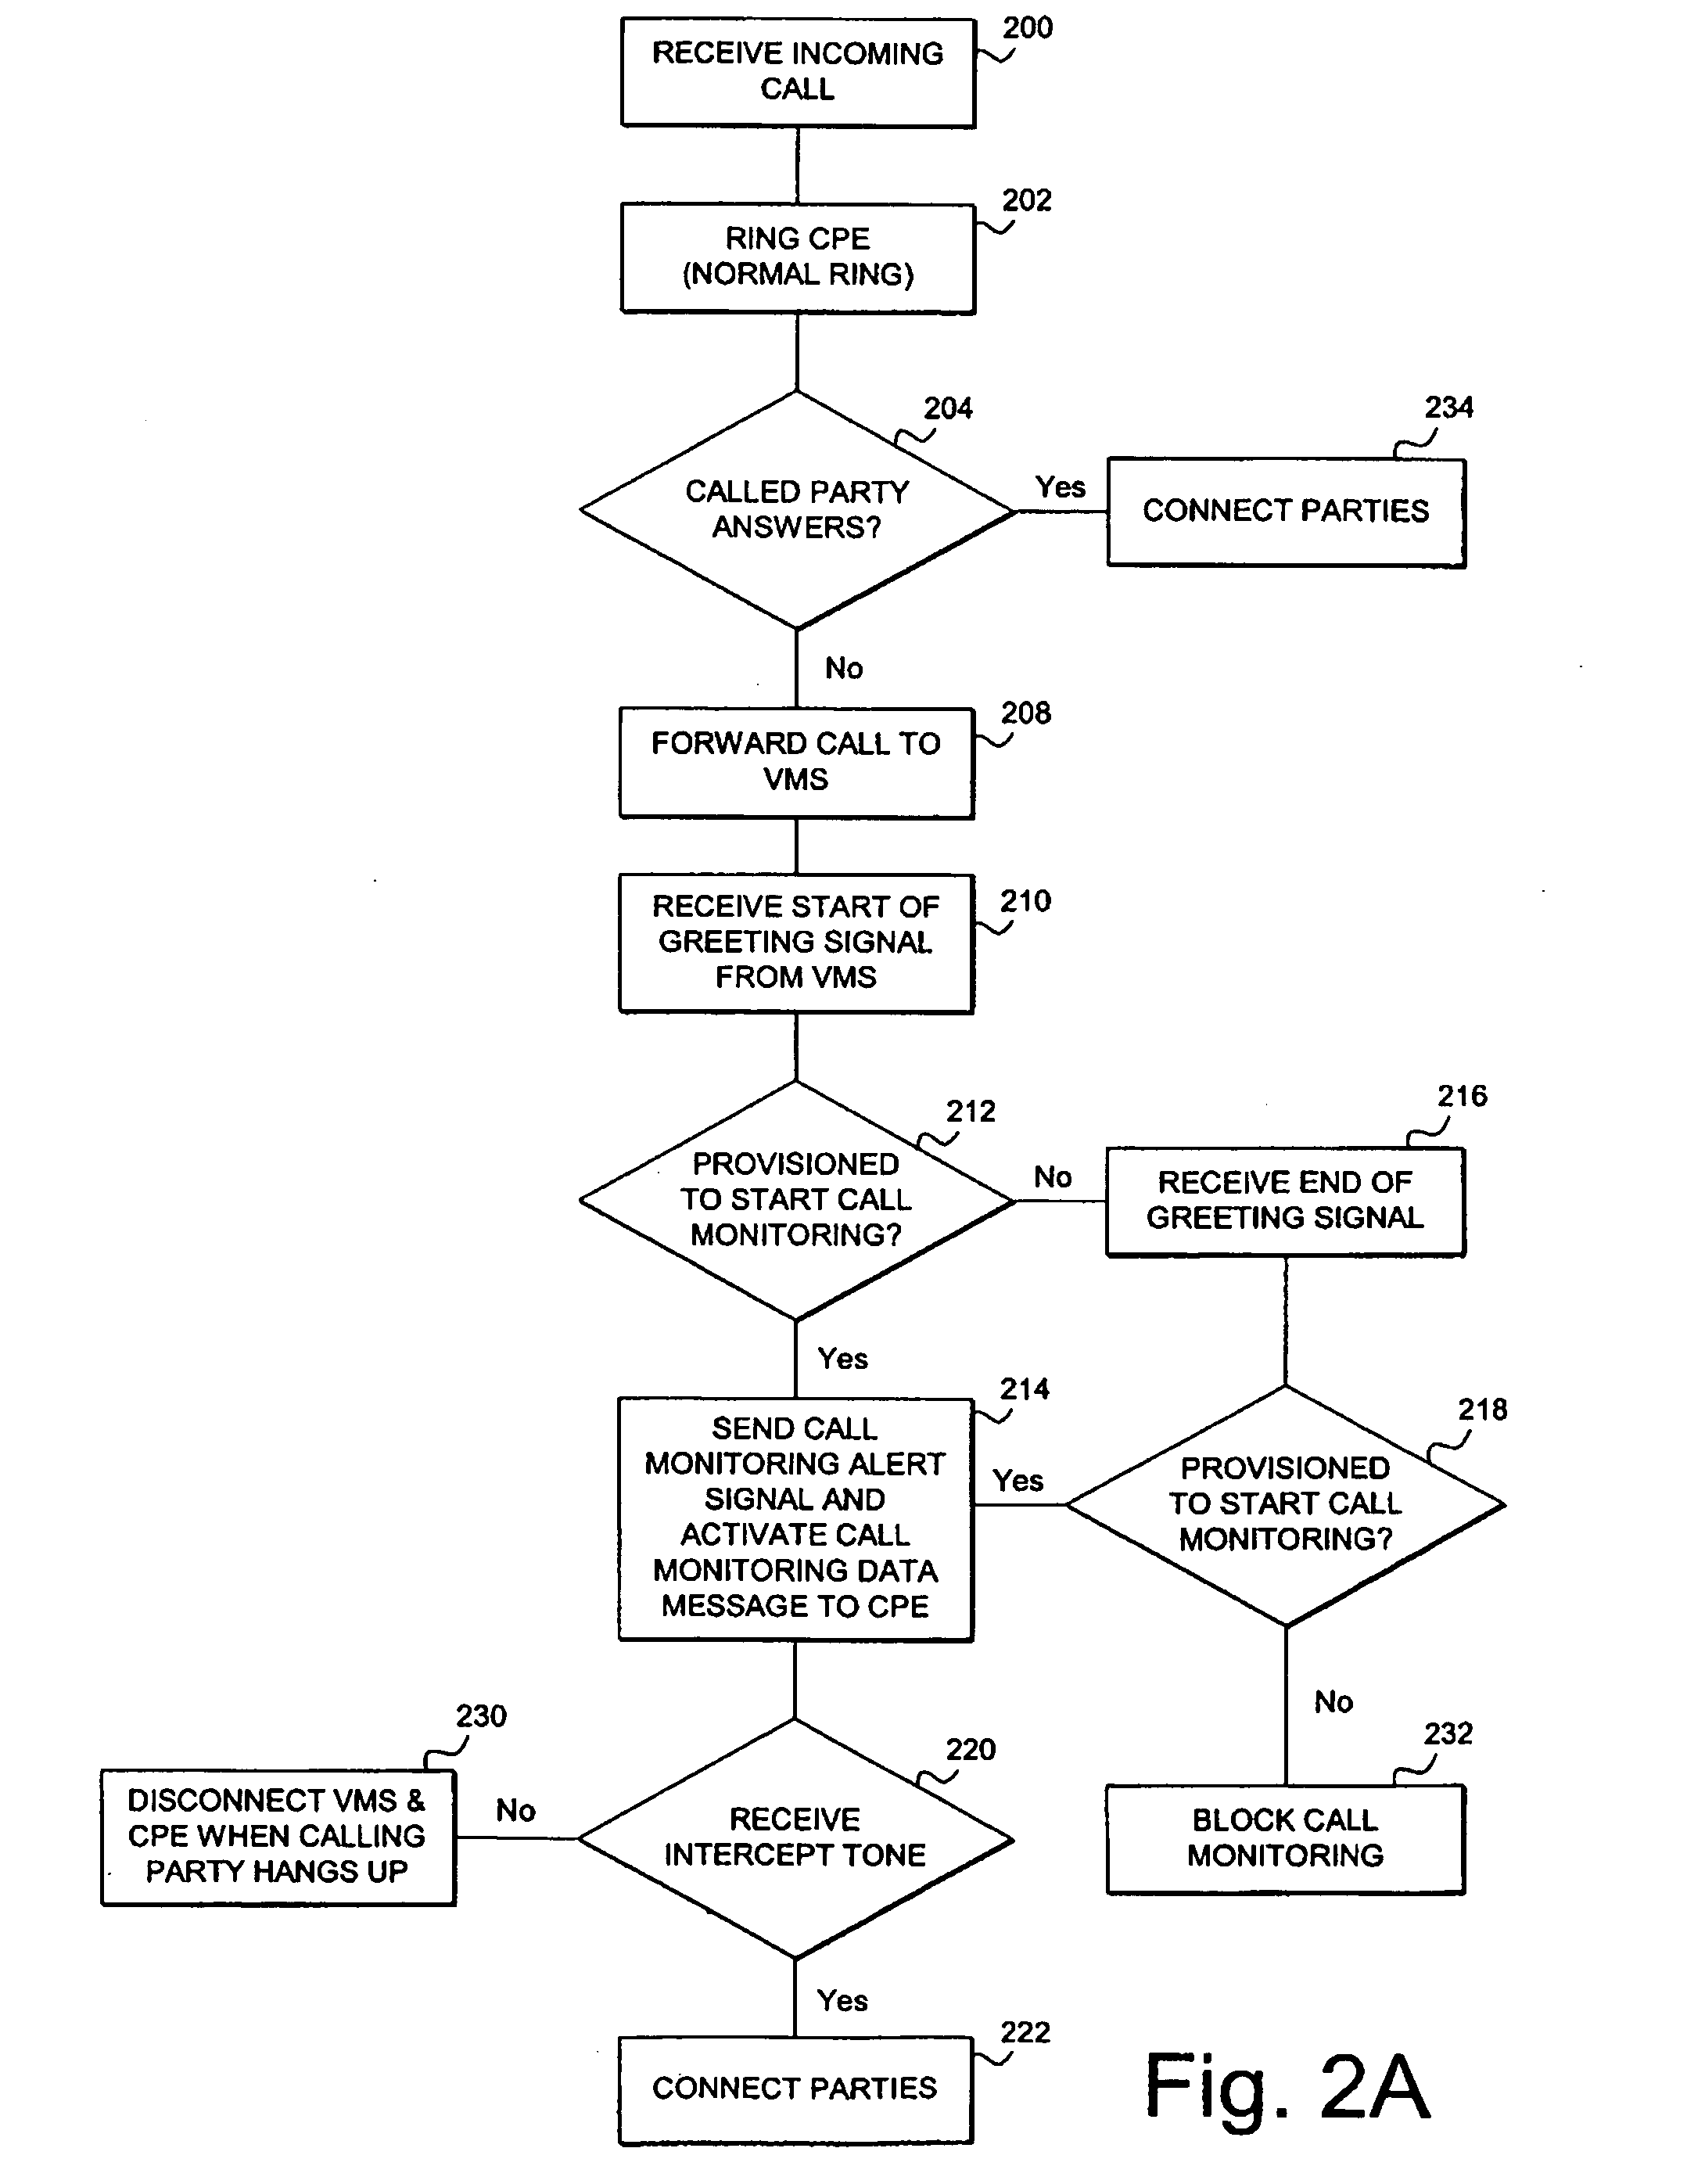 Apparatus, system and method for monitoring a call forwarded to a network-based voice mail system